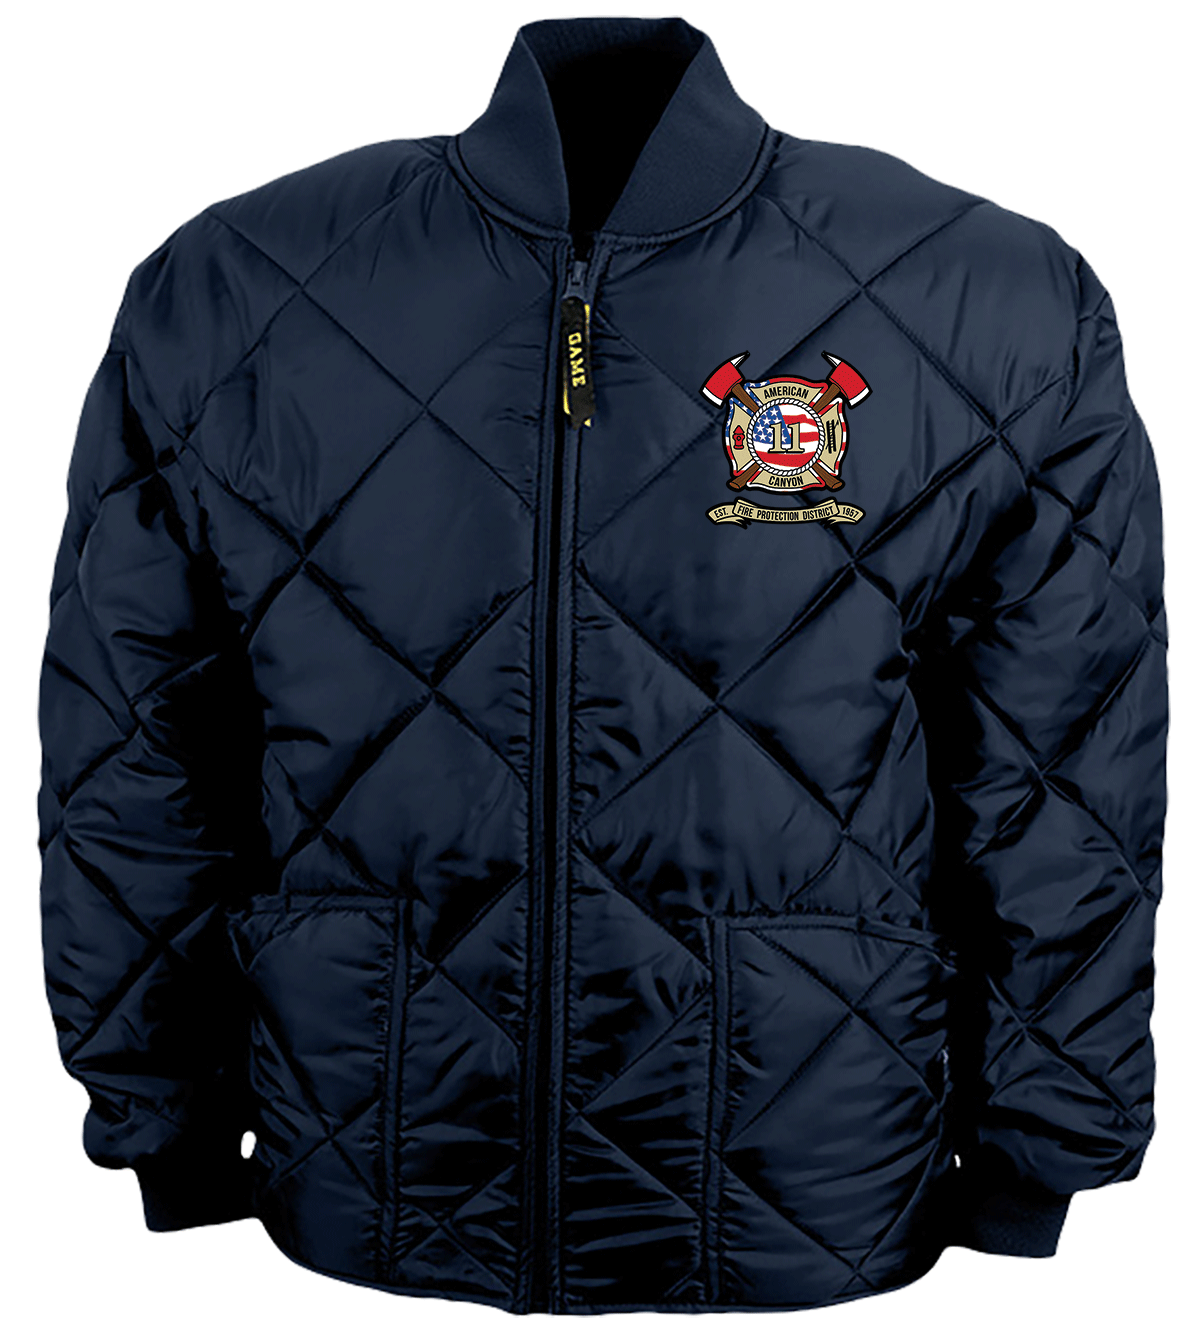 American Canyon Tall Bravest Jacket